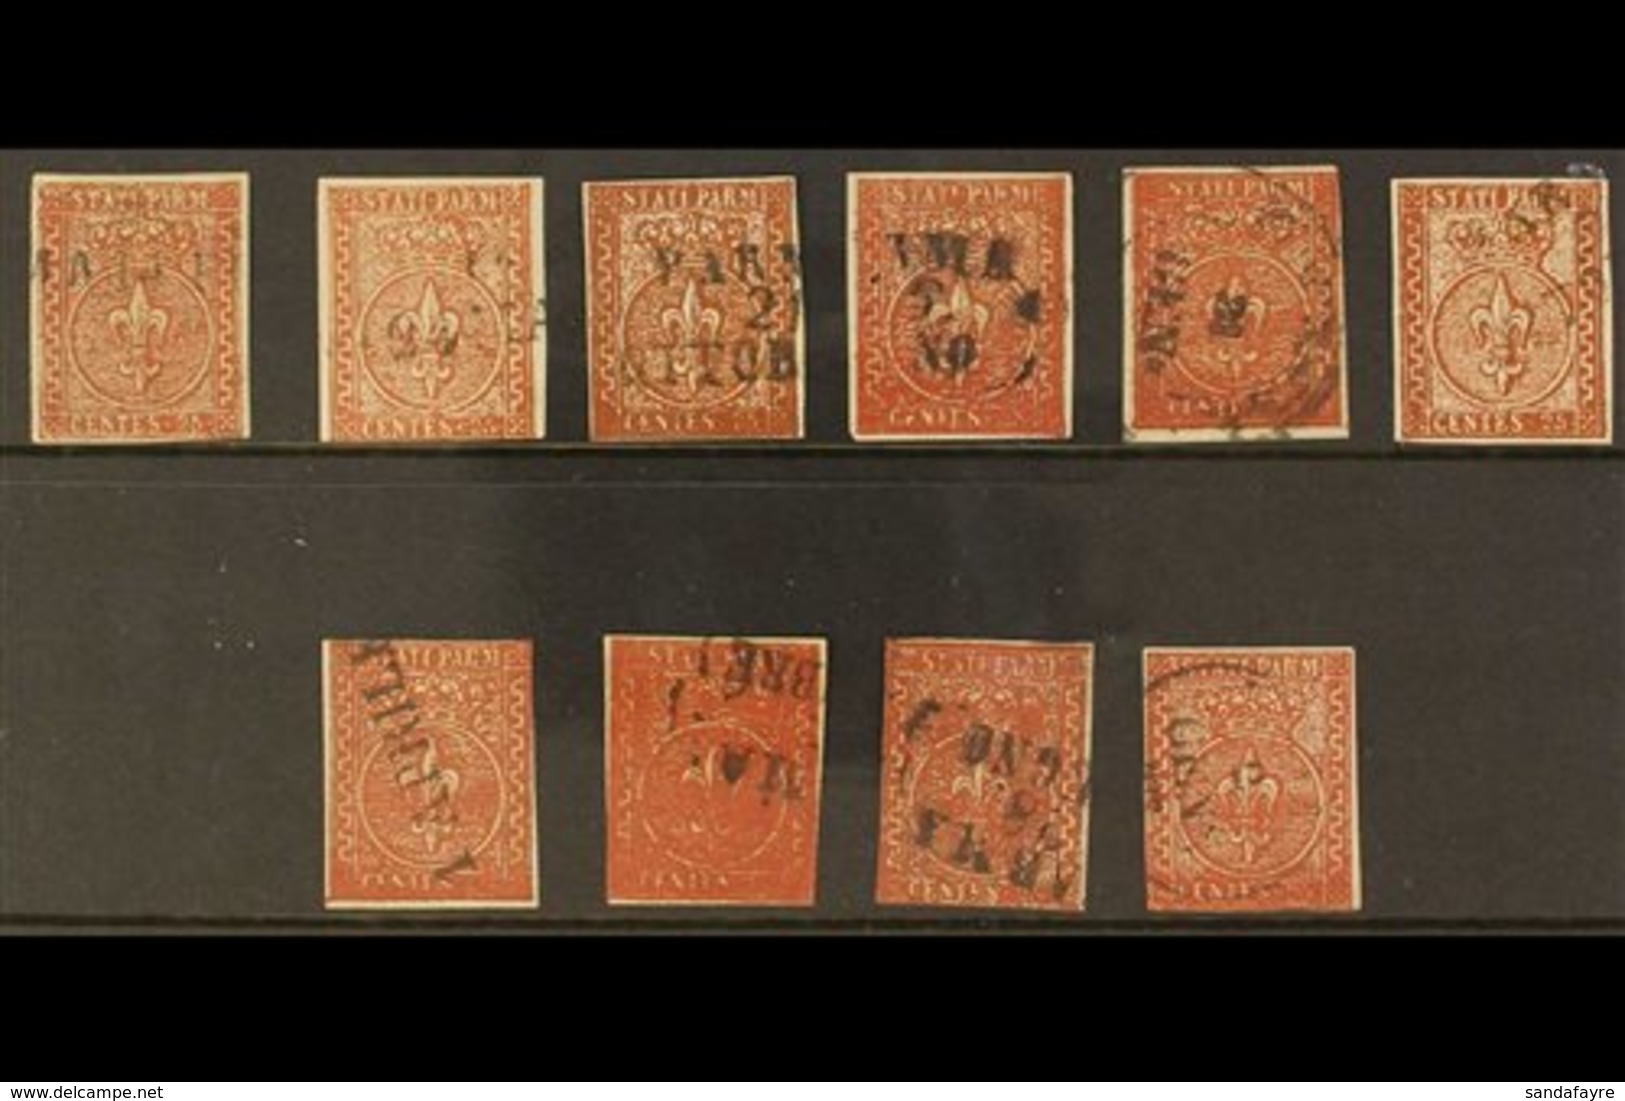 PARMA 1853 25c Brown Red, Sass 8, Good To Fine Used Group Of Used Stamps, Some With Full Margins Showing A Range Of Mino - Unclassified